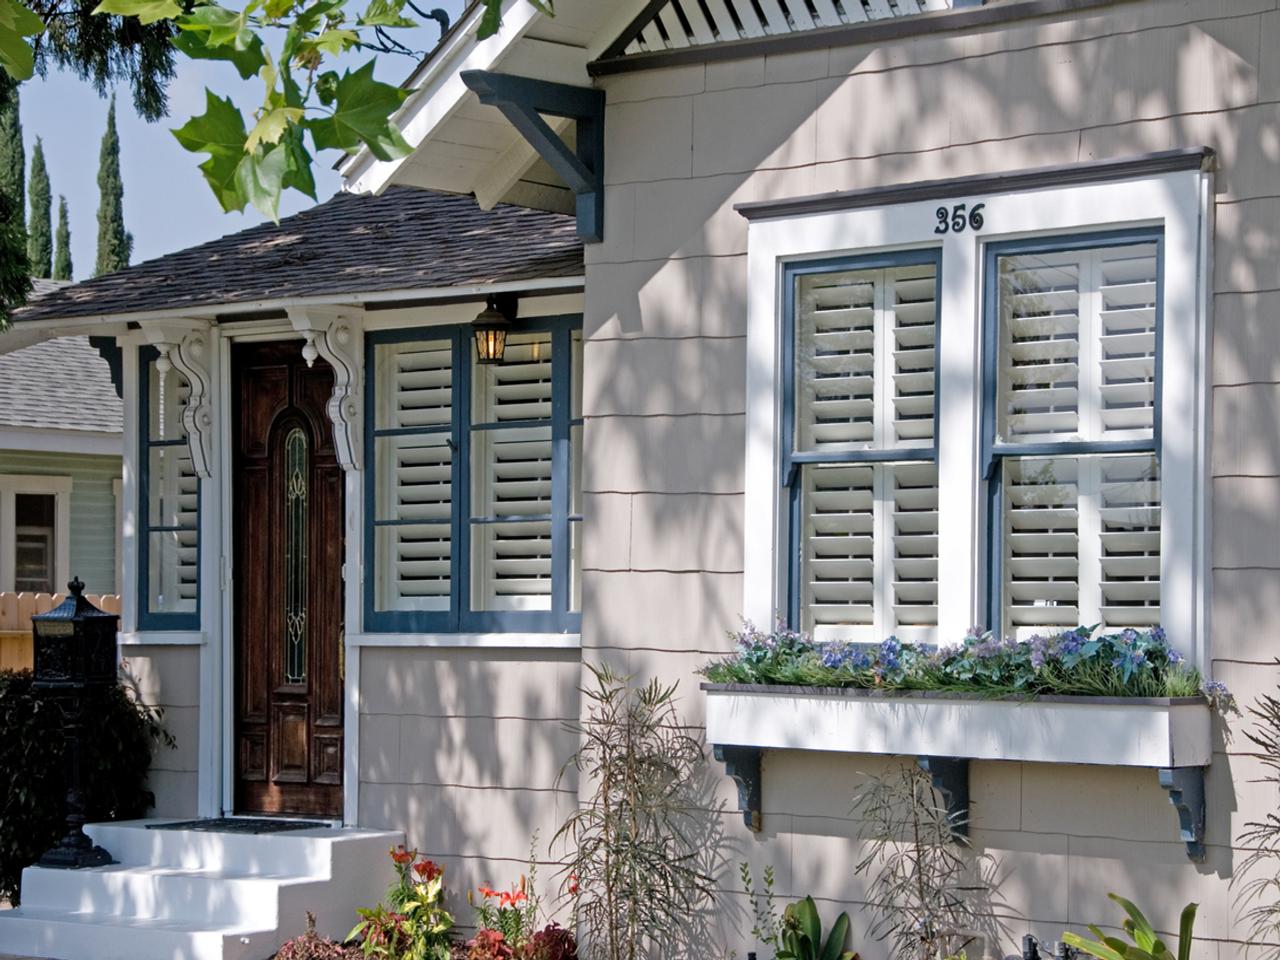 Exterior view of cottage with interior shutters